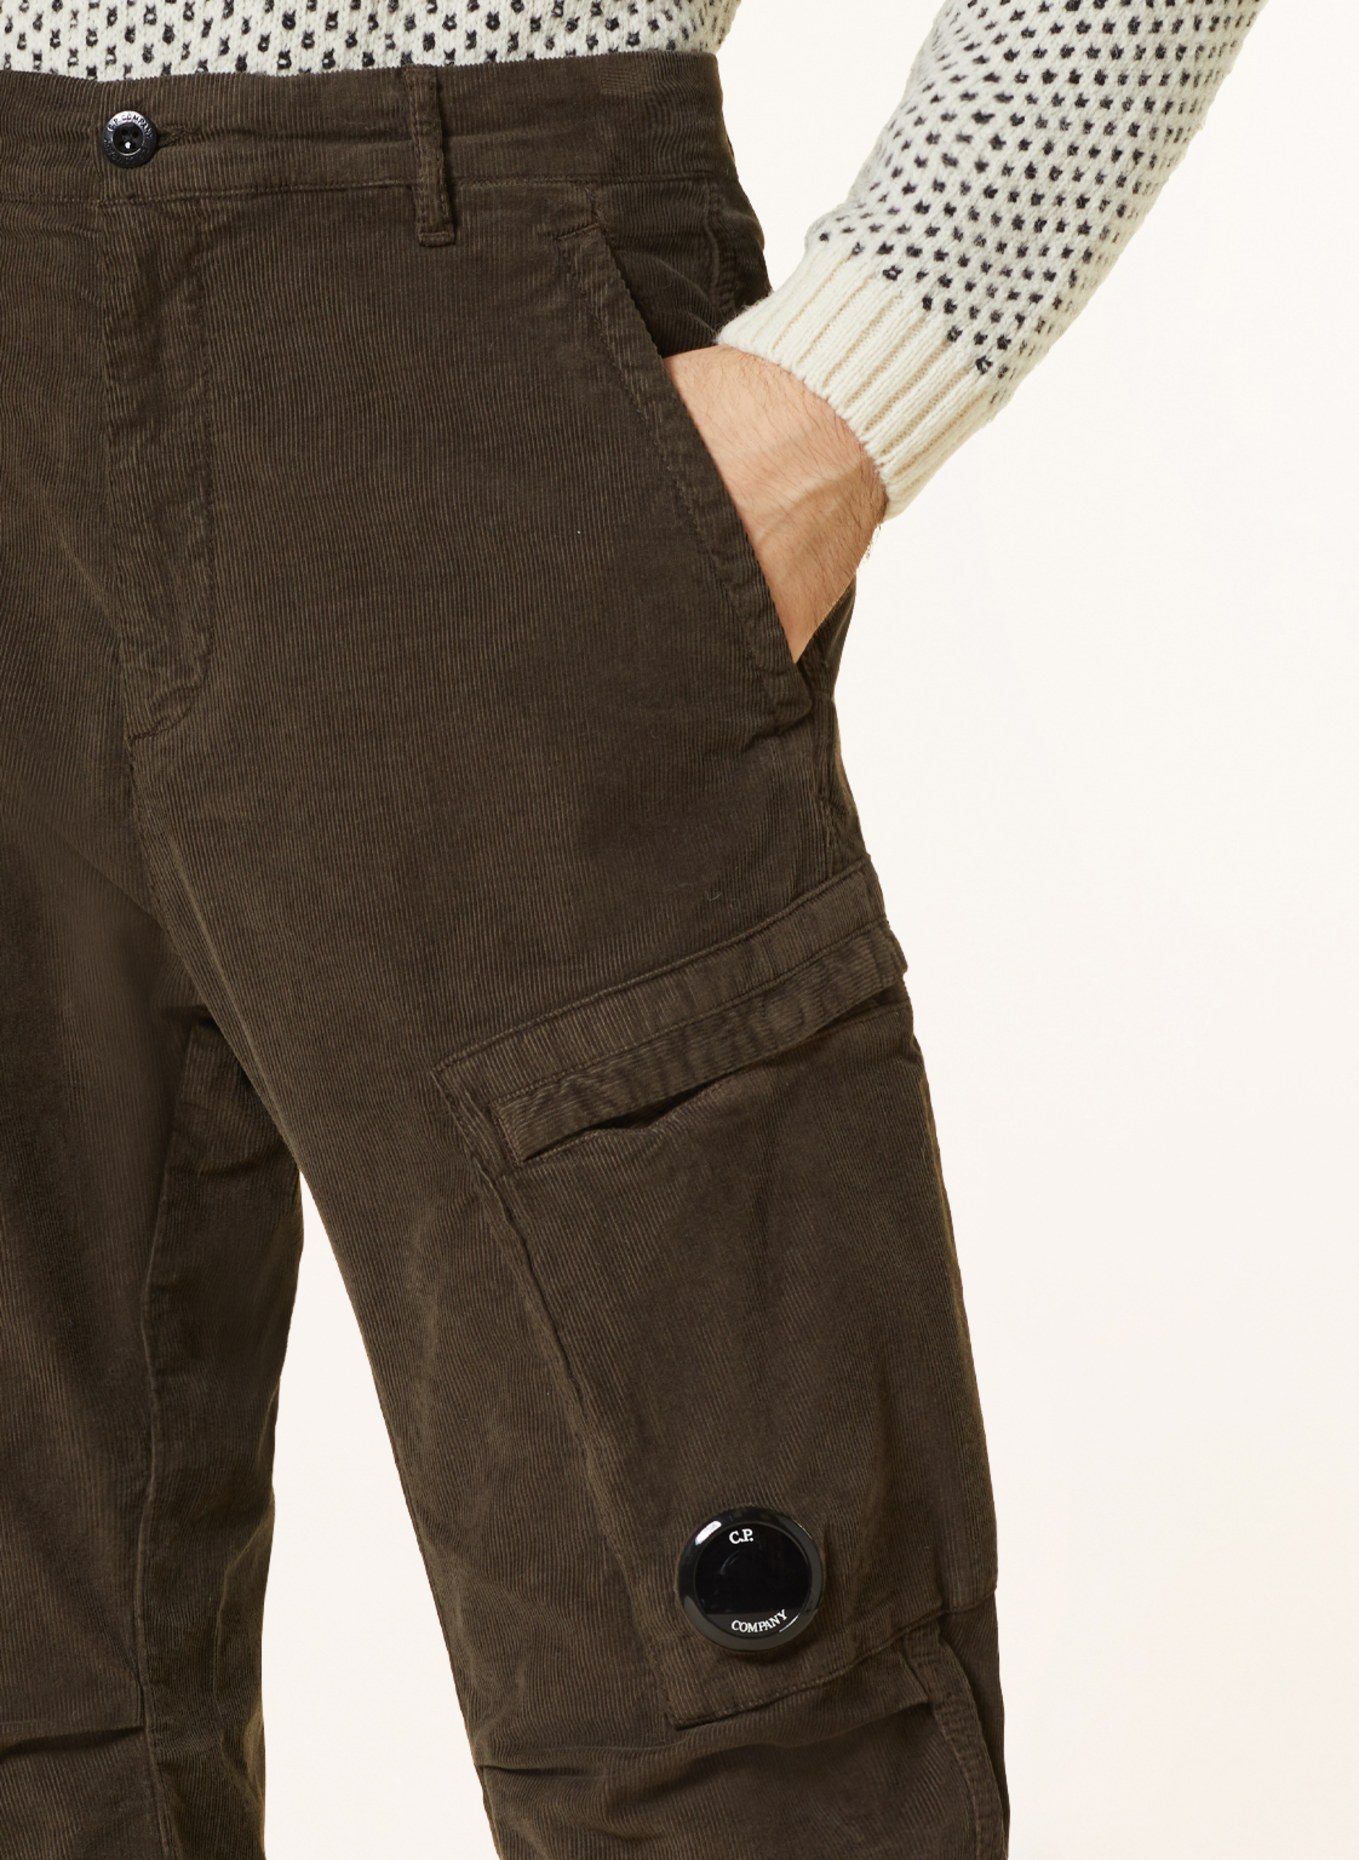 C.P. COMPANY Cargo pants regular fit in corduroy, Color: OLIVE (Image 5)